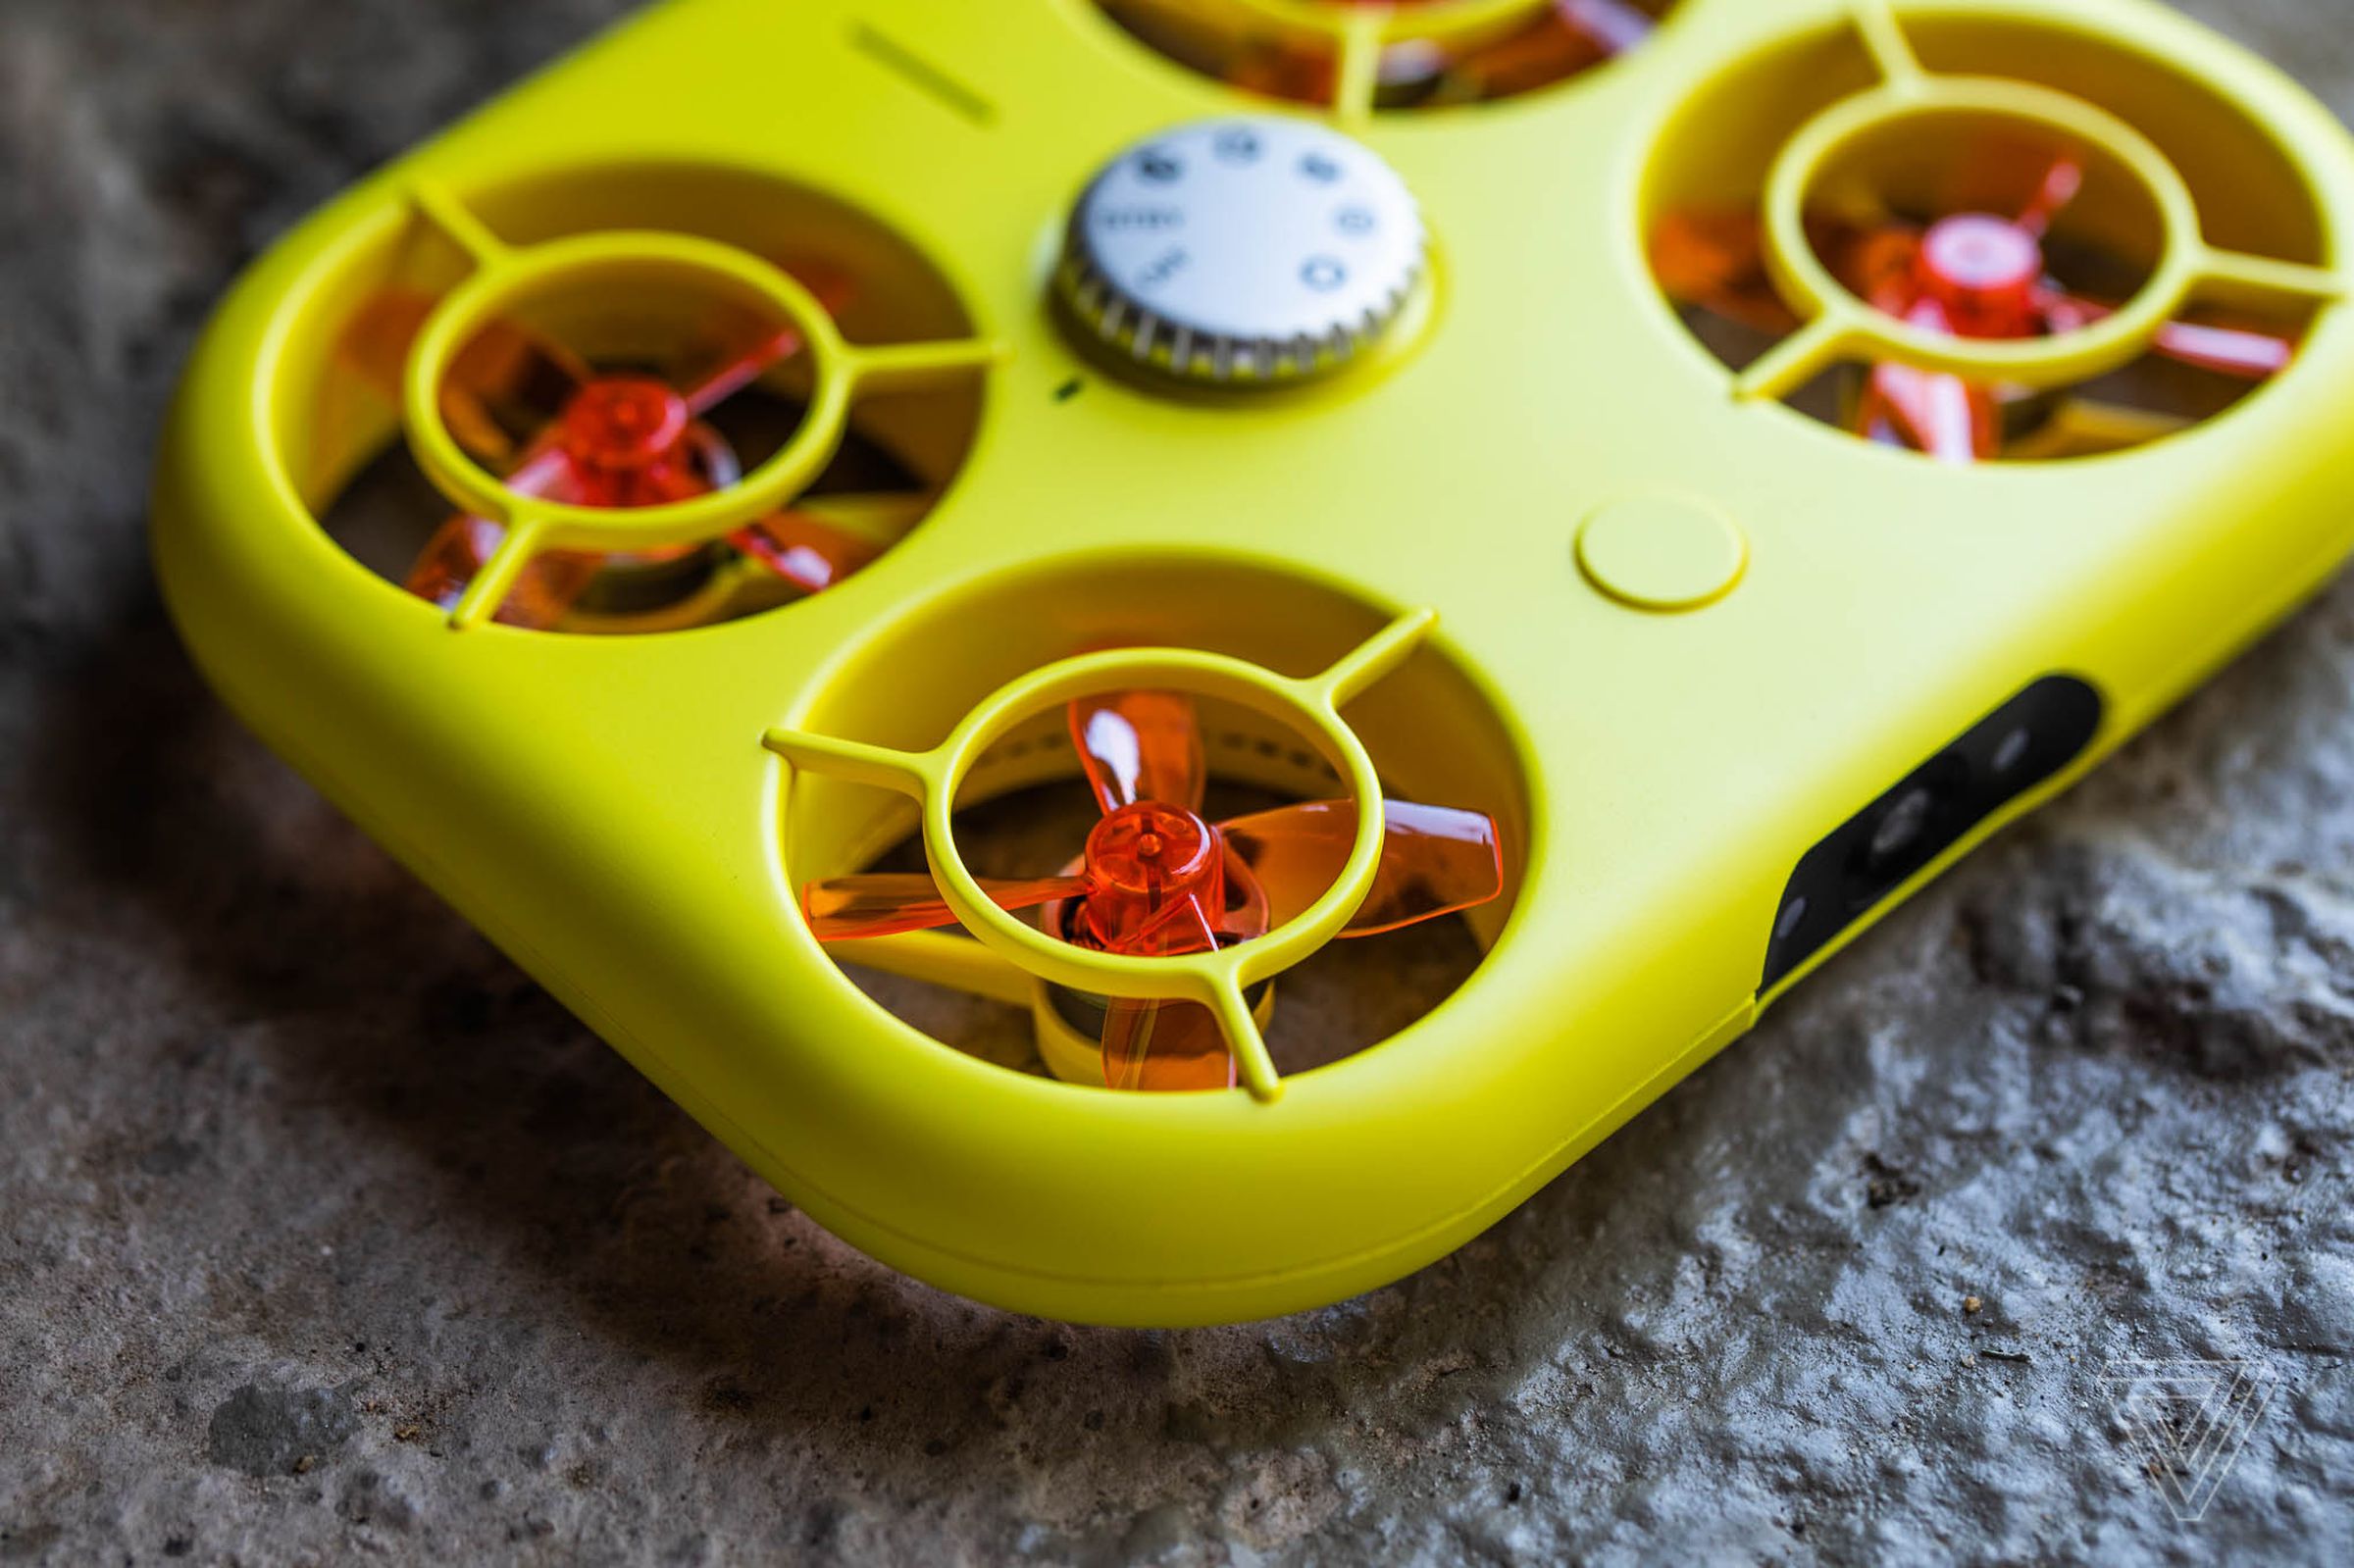 A yellow drone shaped like a rounded rectangle instead of exposed blades — it has translucent orange propellers within its boxy but thin frame.